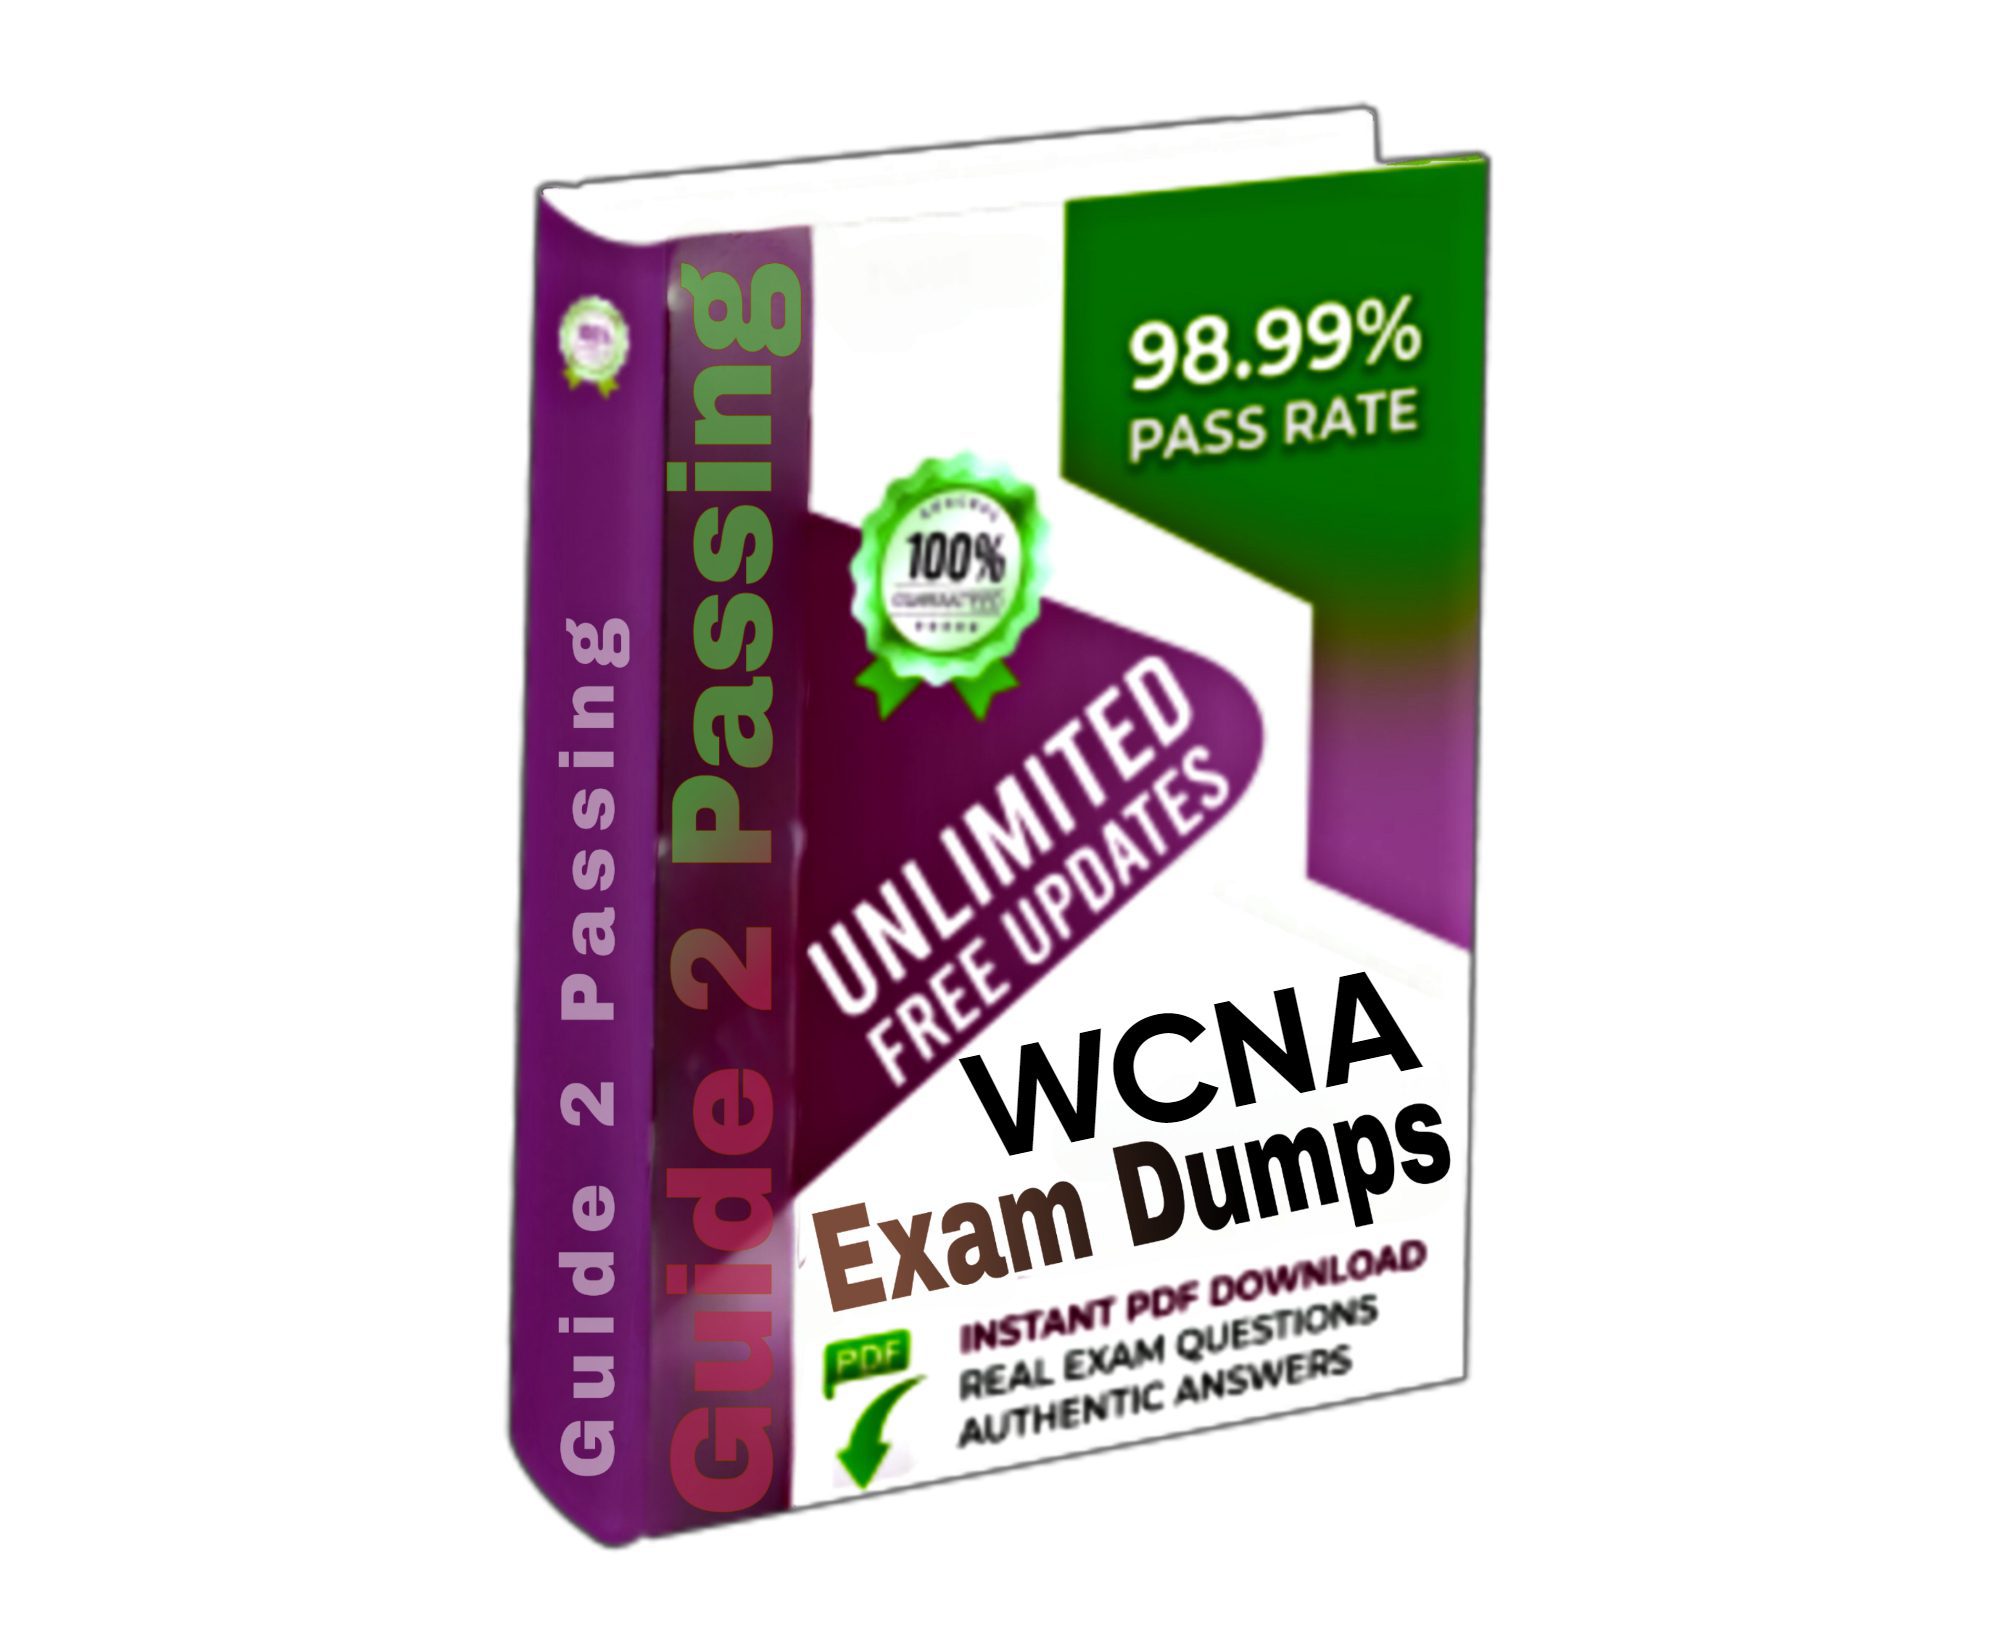 Pass Your Wireshark WCNA Exam Dumps From Guide 2 Passing